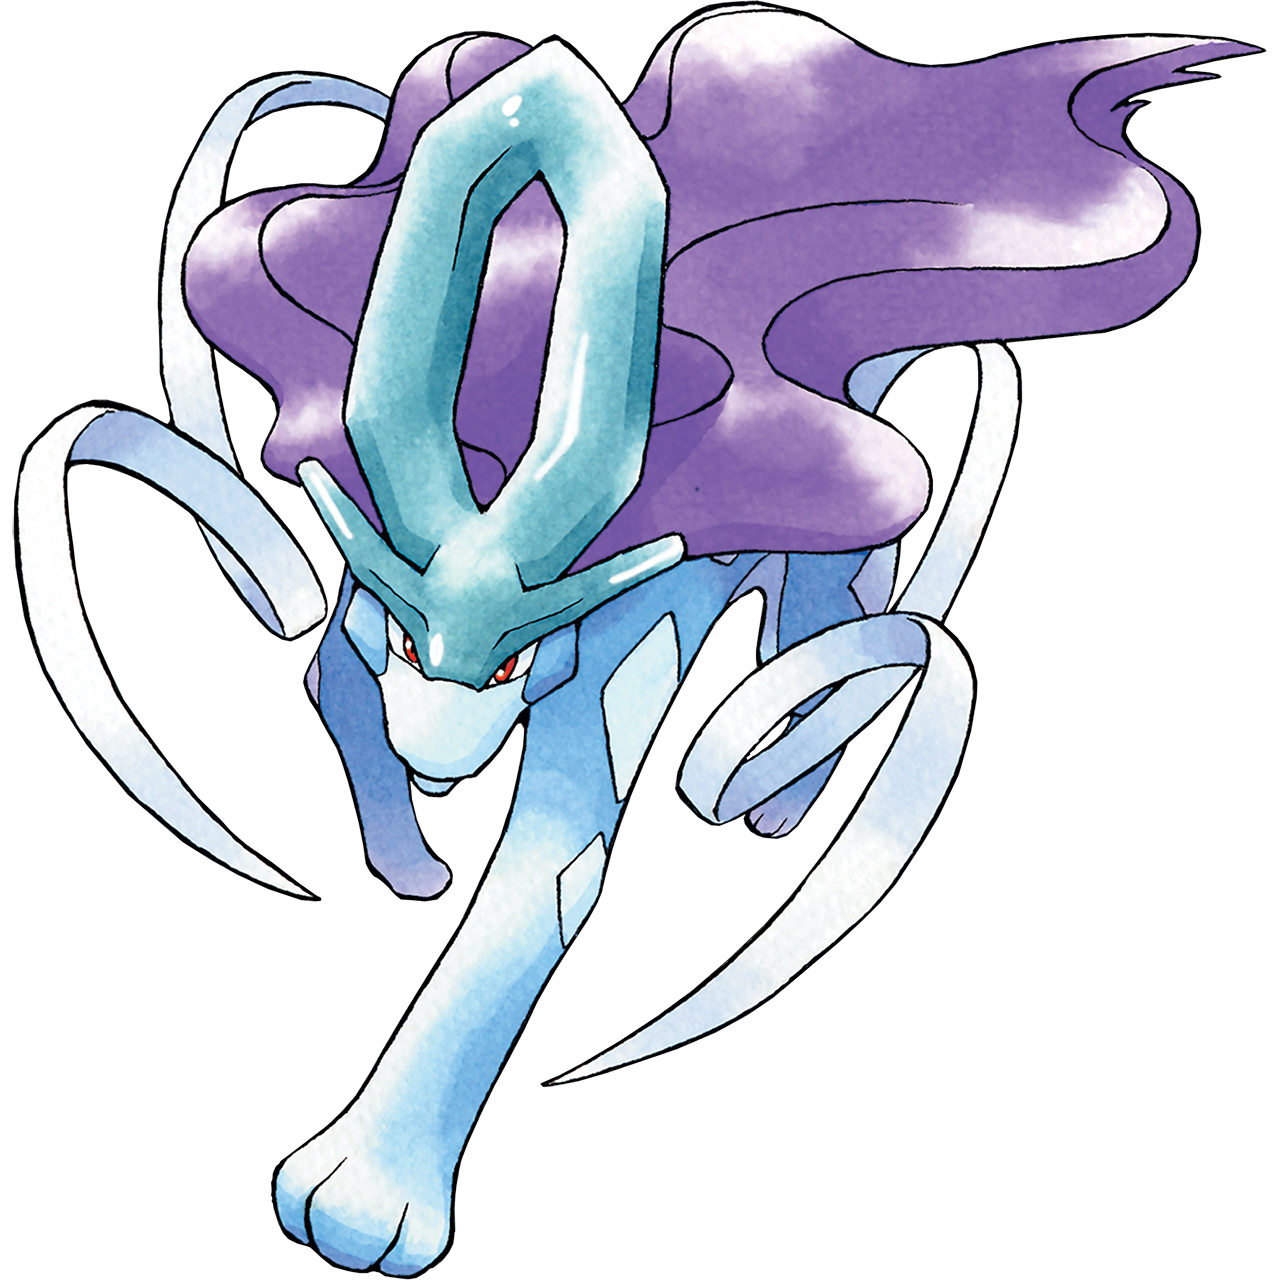 Suicune. Resembling a wolf, they have blue fur, with white diamond markings and a white belly. They have a flowing purple mane down their back, and their tail is twin white ribbons that flow forward. The large crest rising from their forehead is a blue hexagonal ring with small spikes at either side of the base.